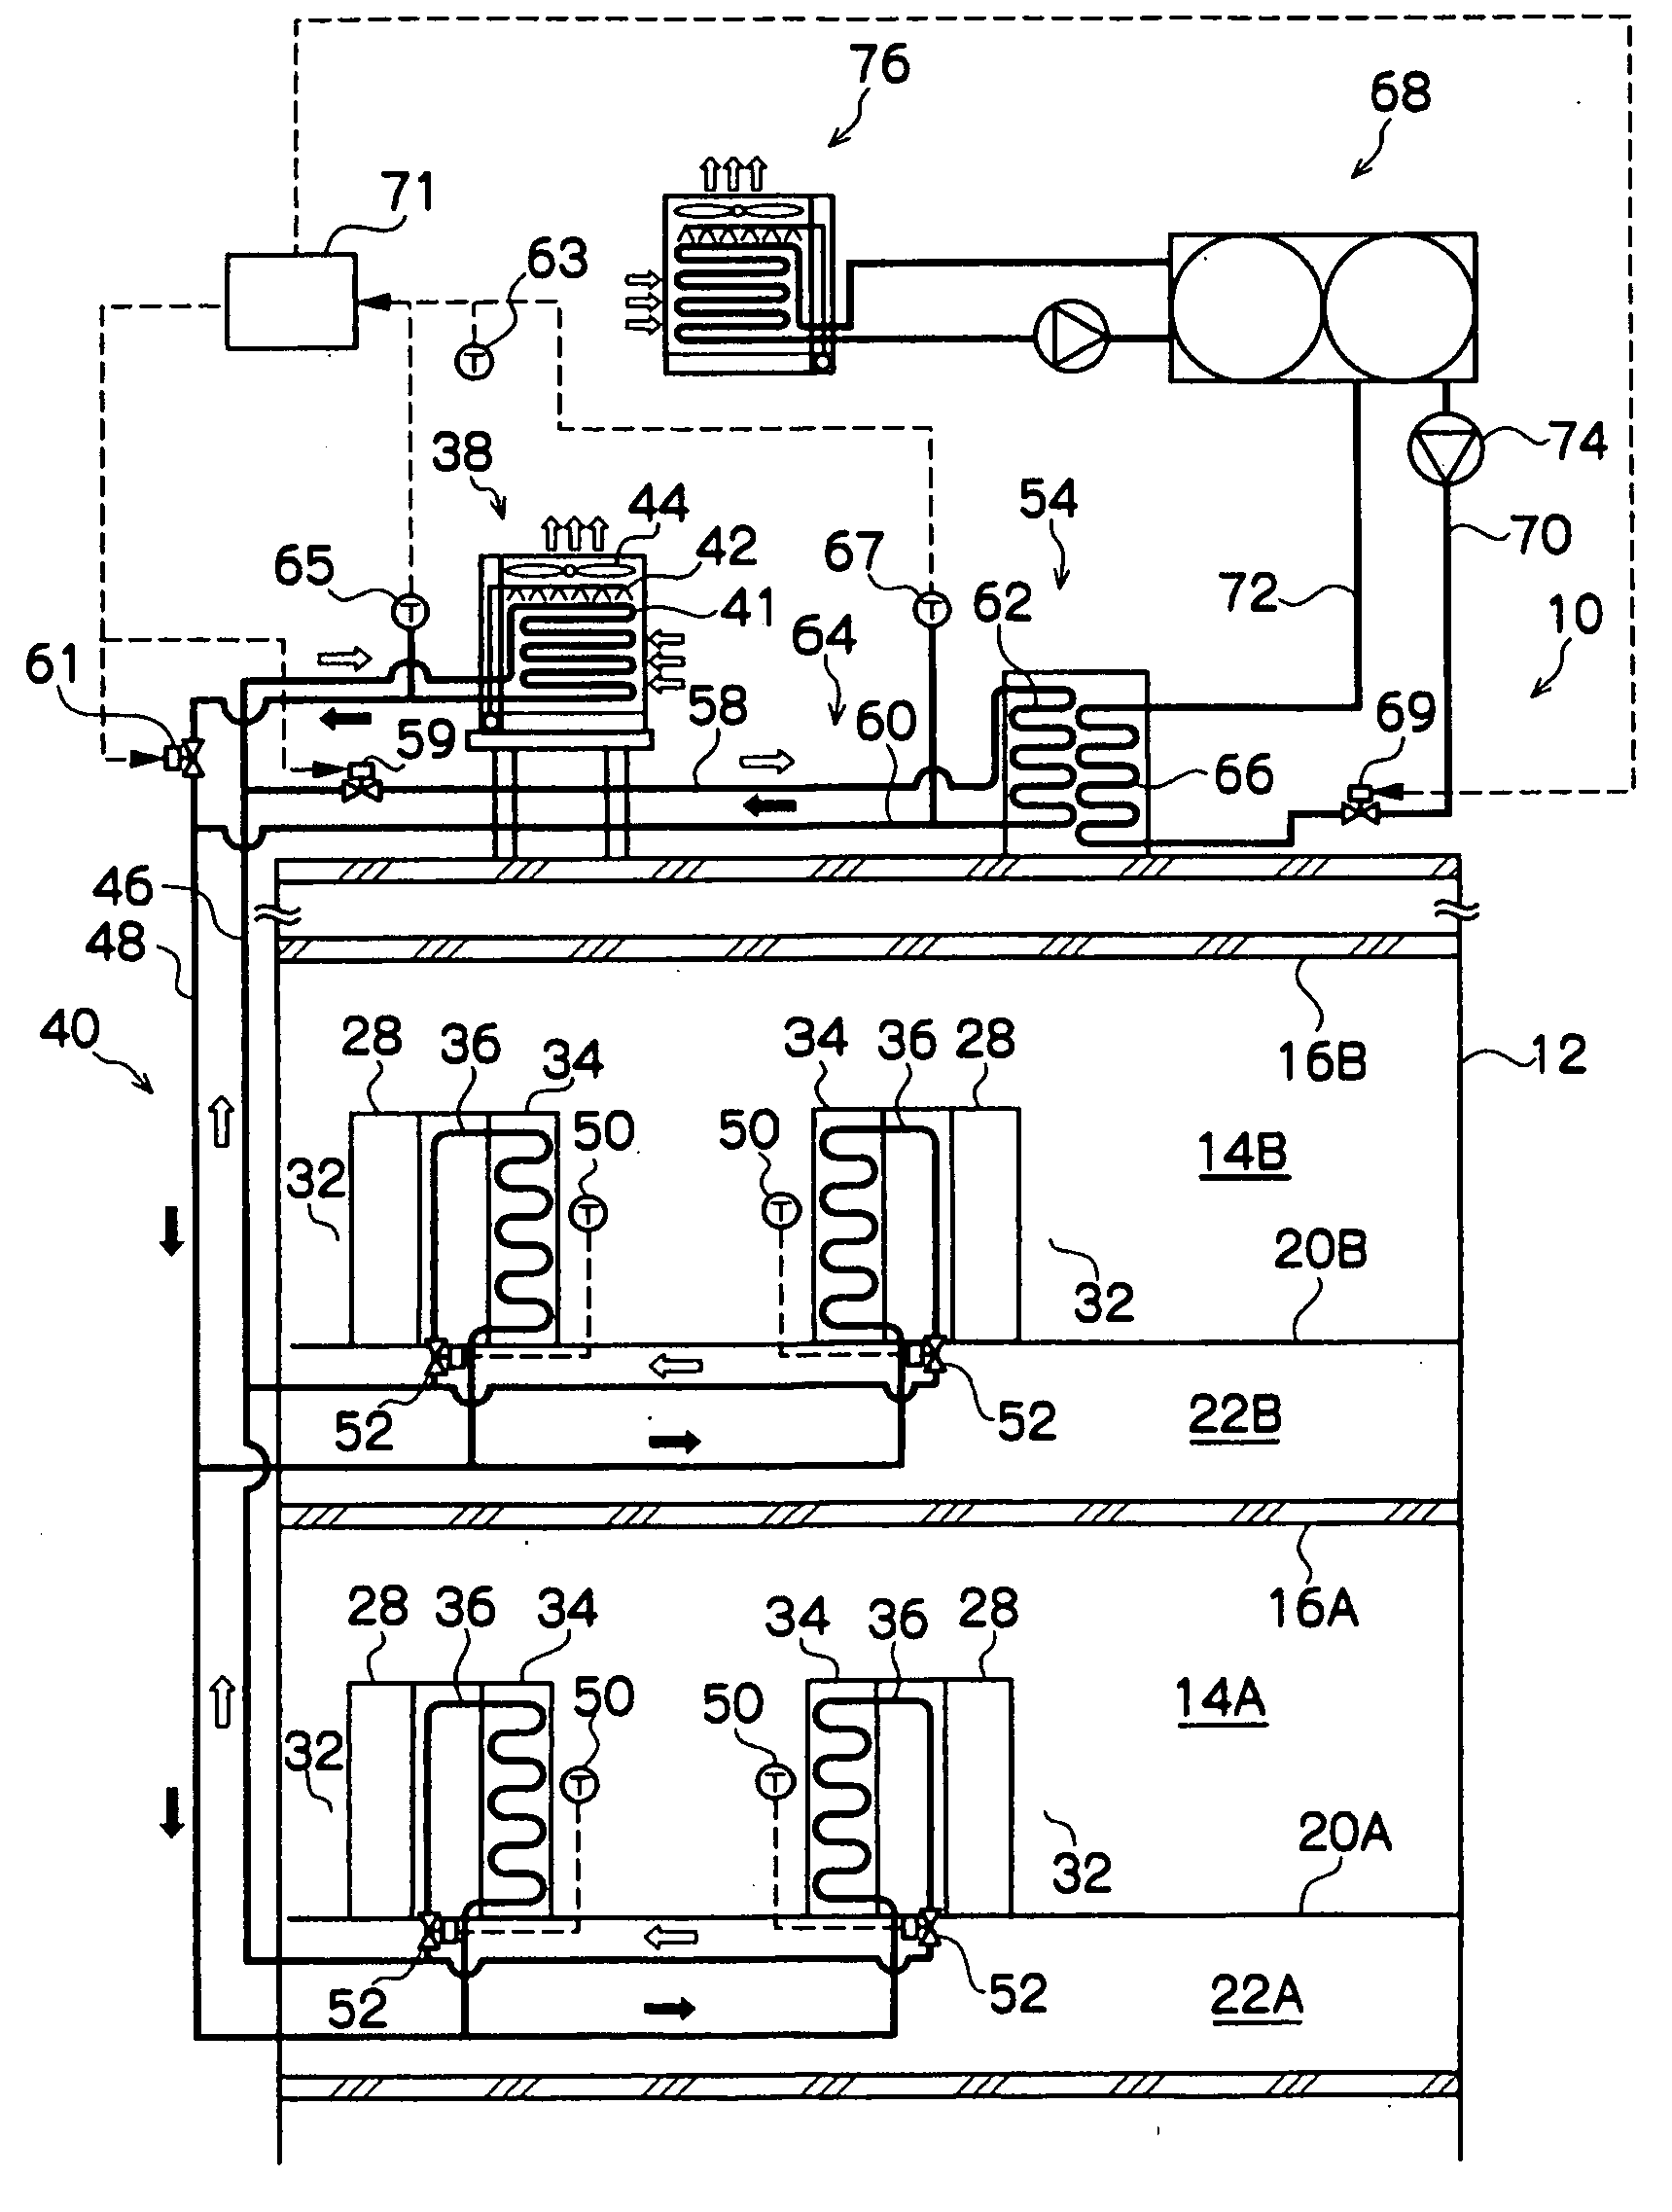 Cooling system for electronic equipment